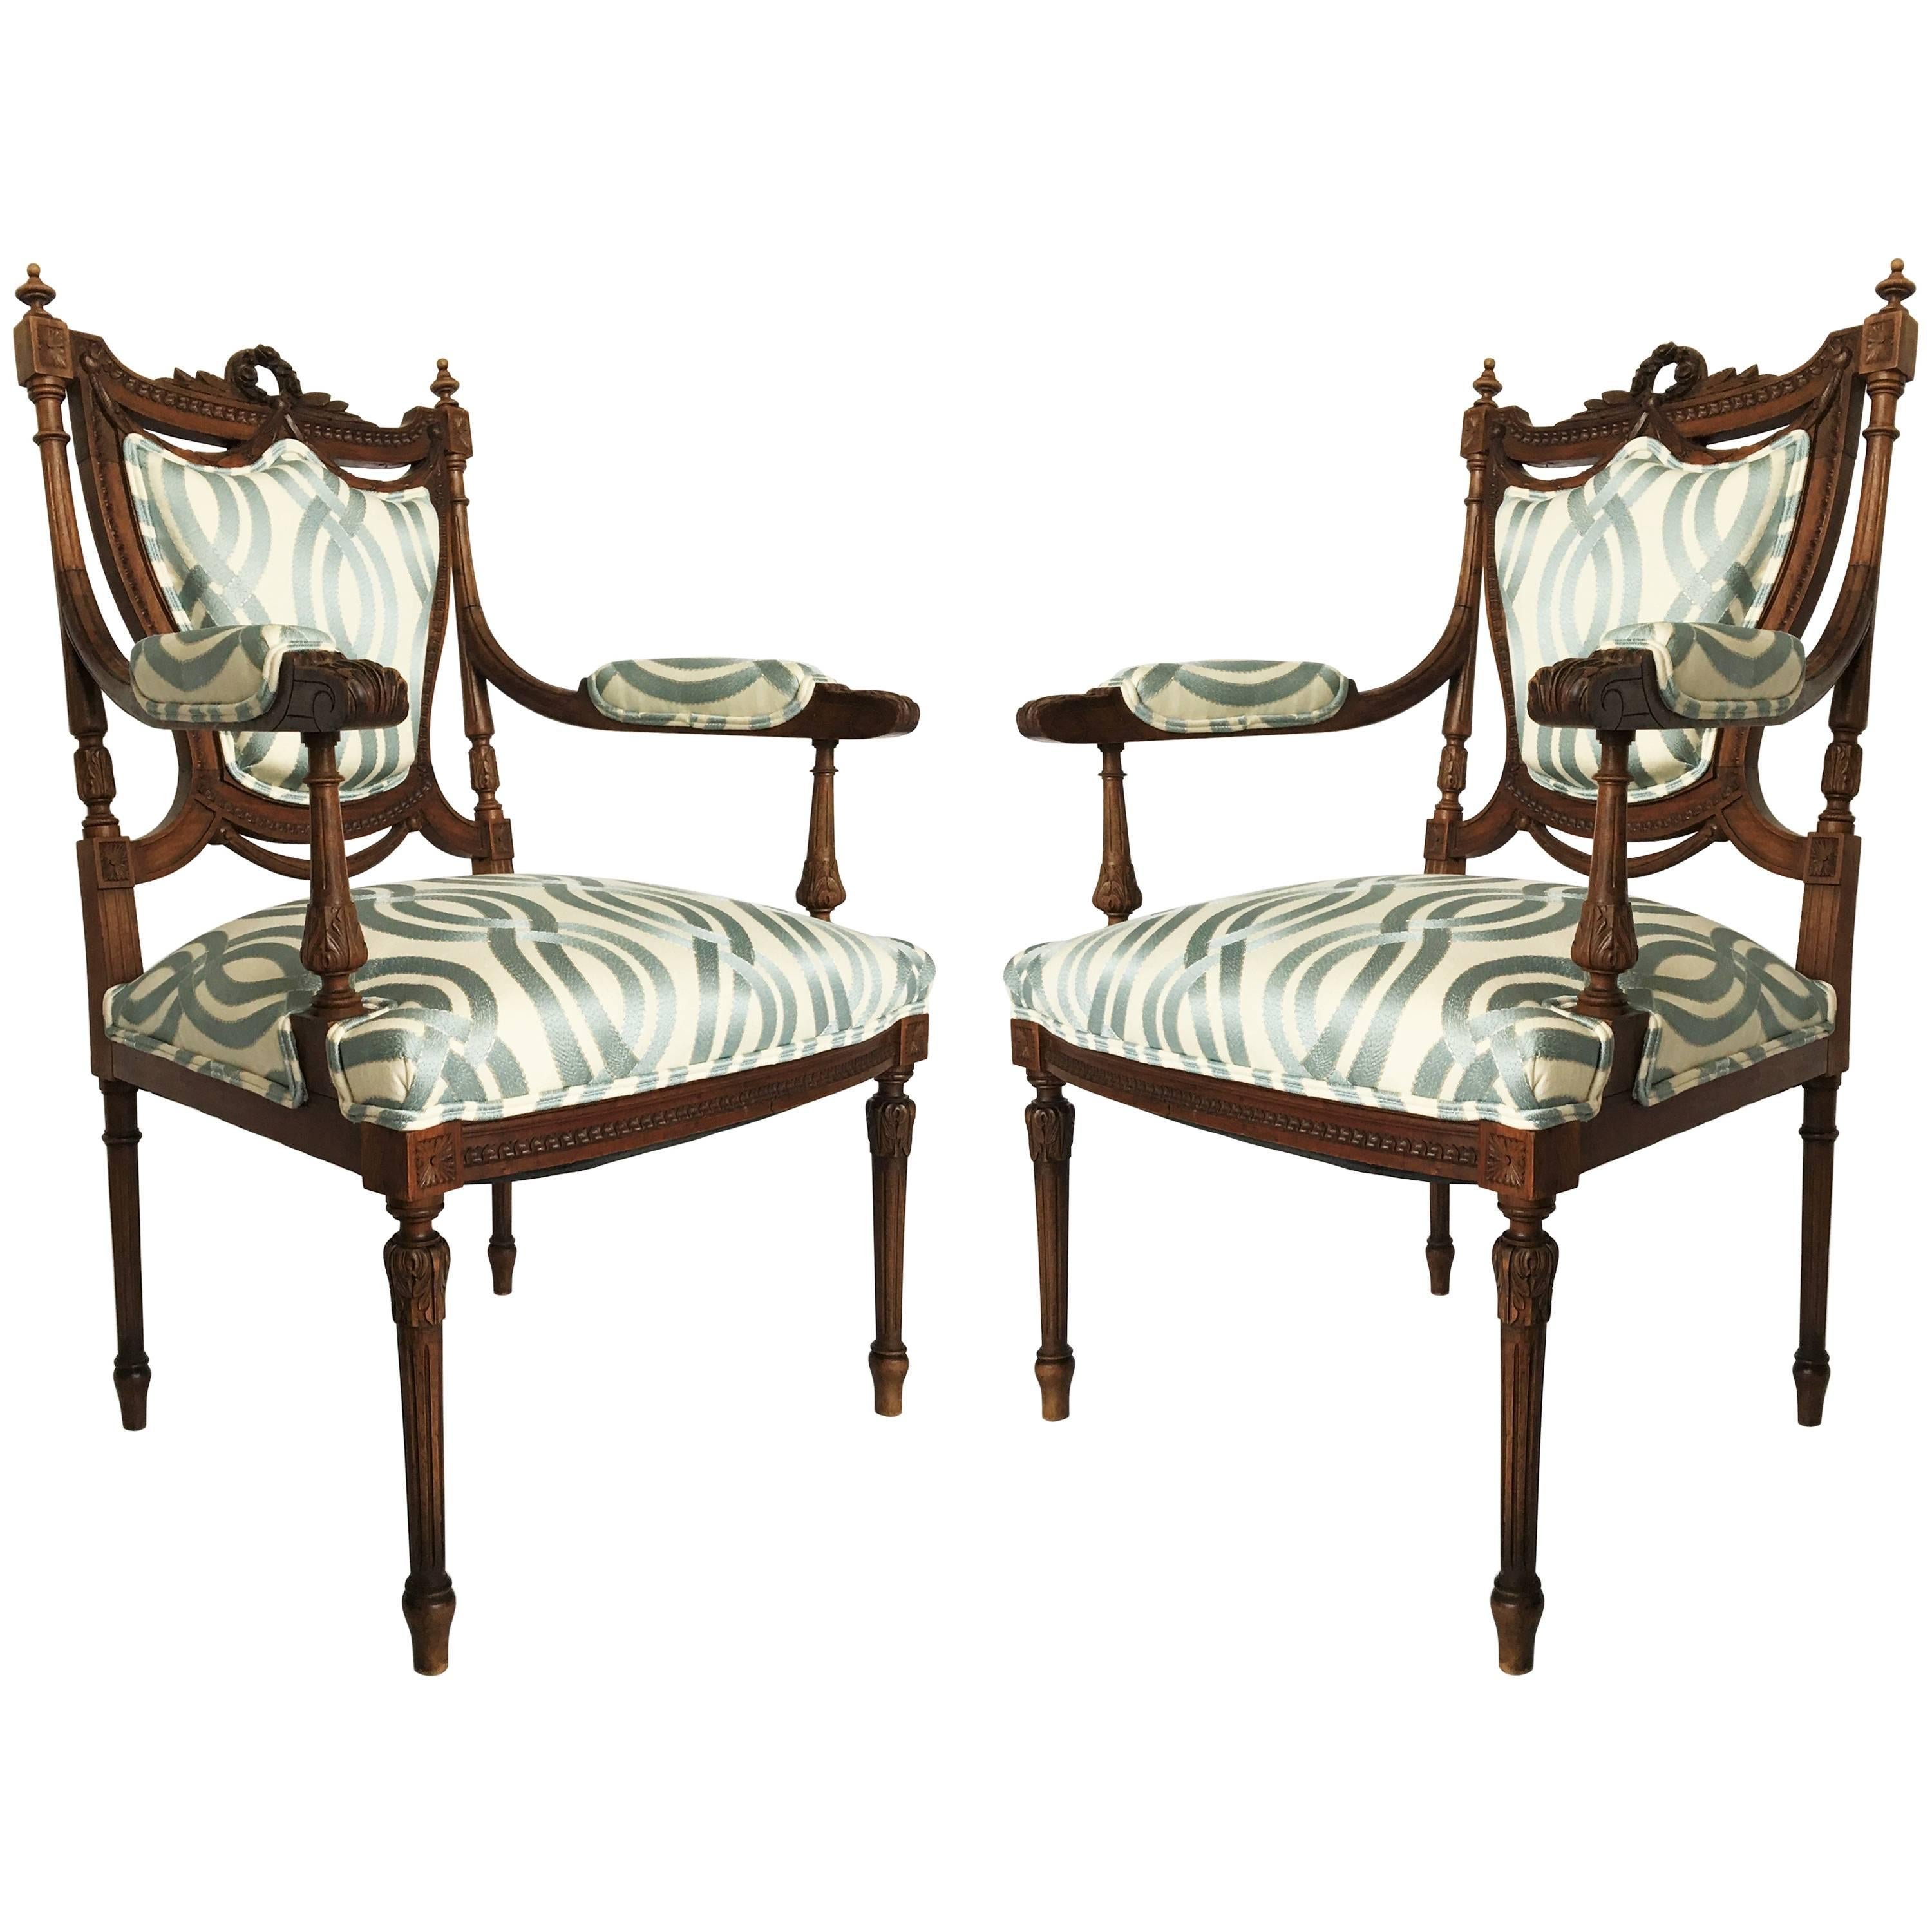 Stunning Pair of Louis XVI Chairs Attributed to Jean-Baptiste Claude Sene For Sale